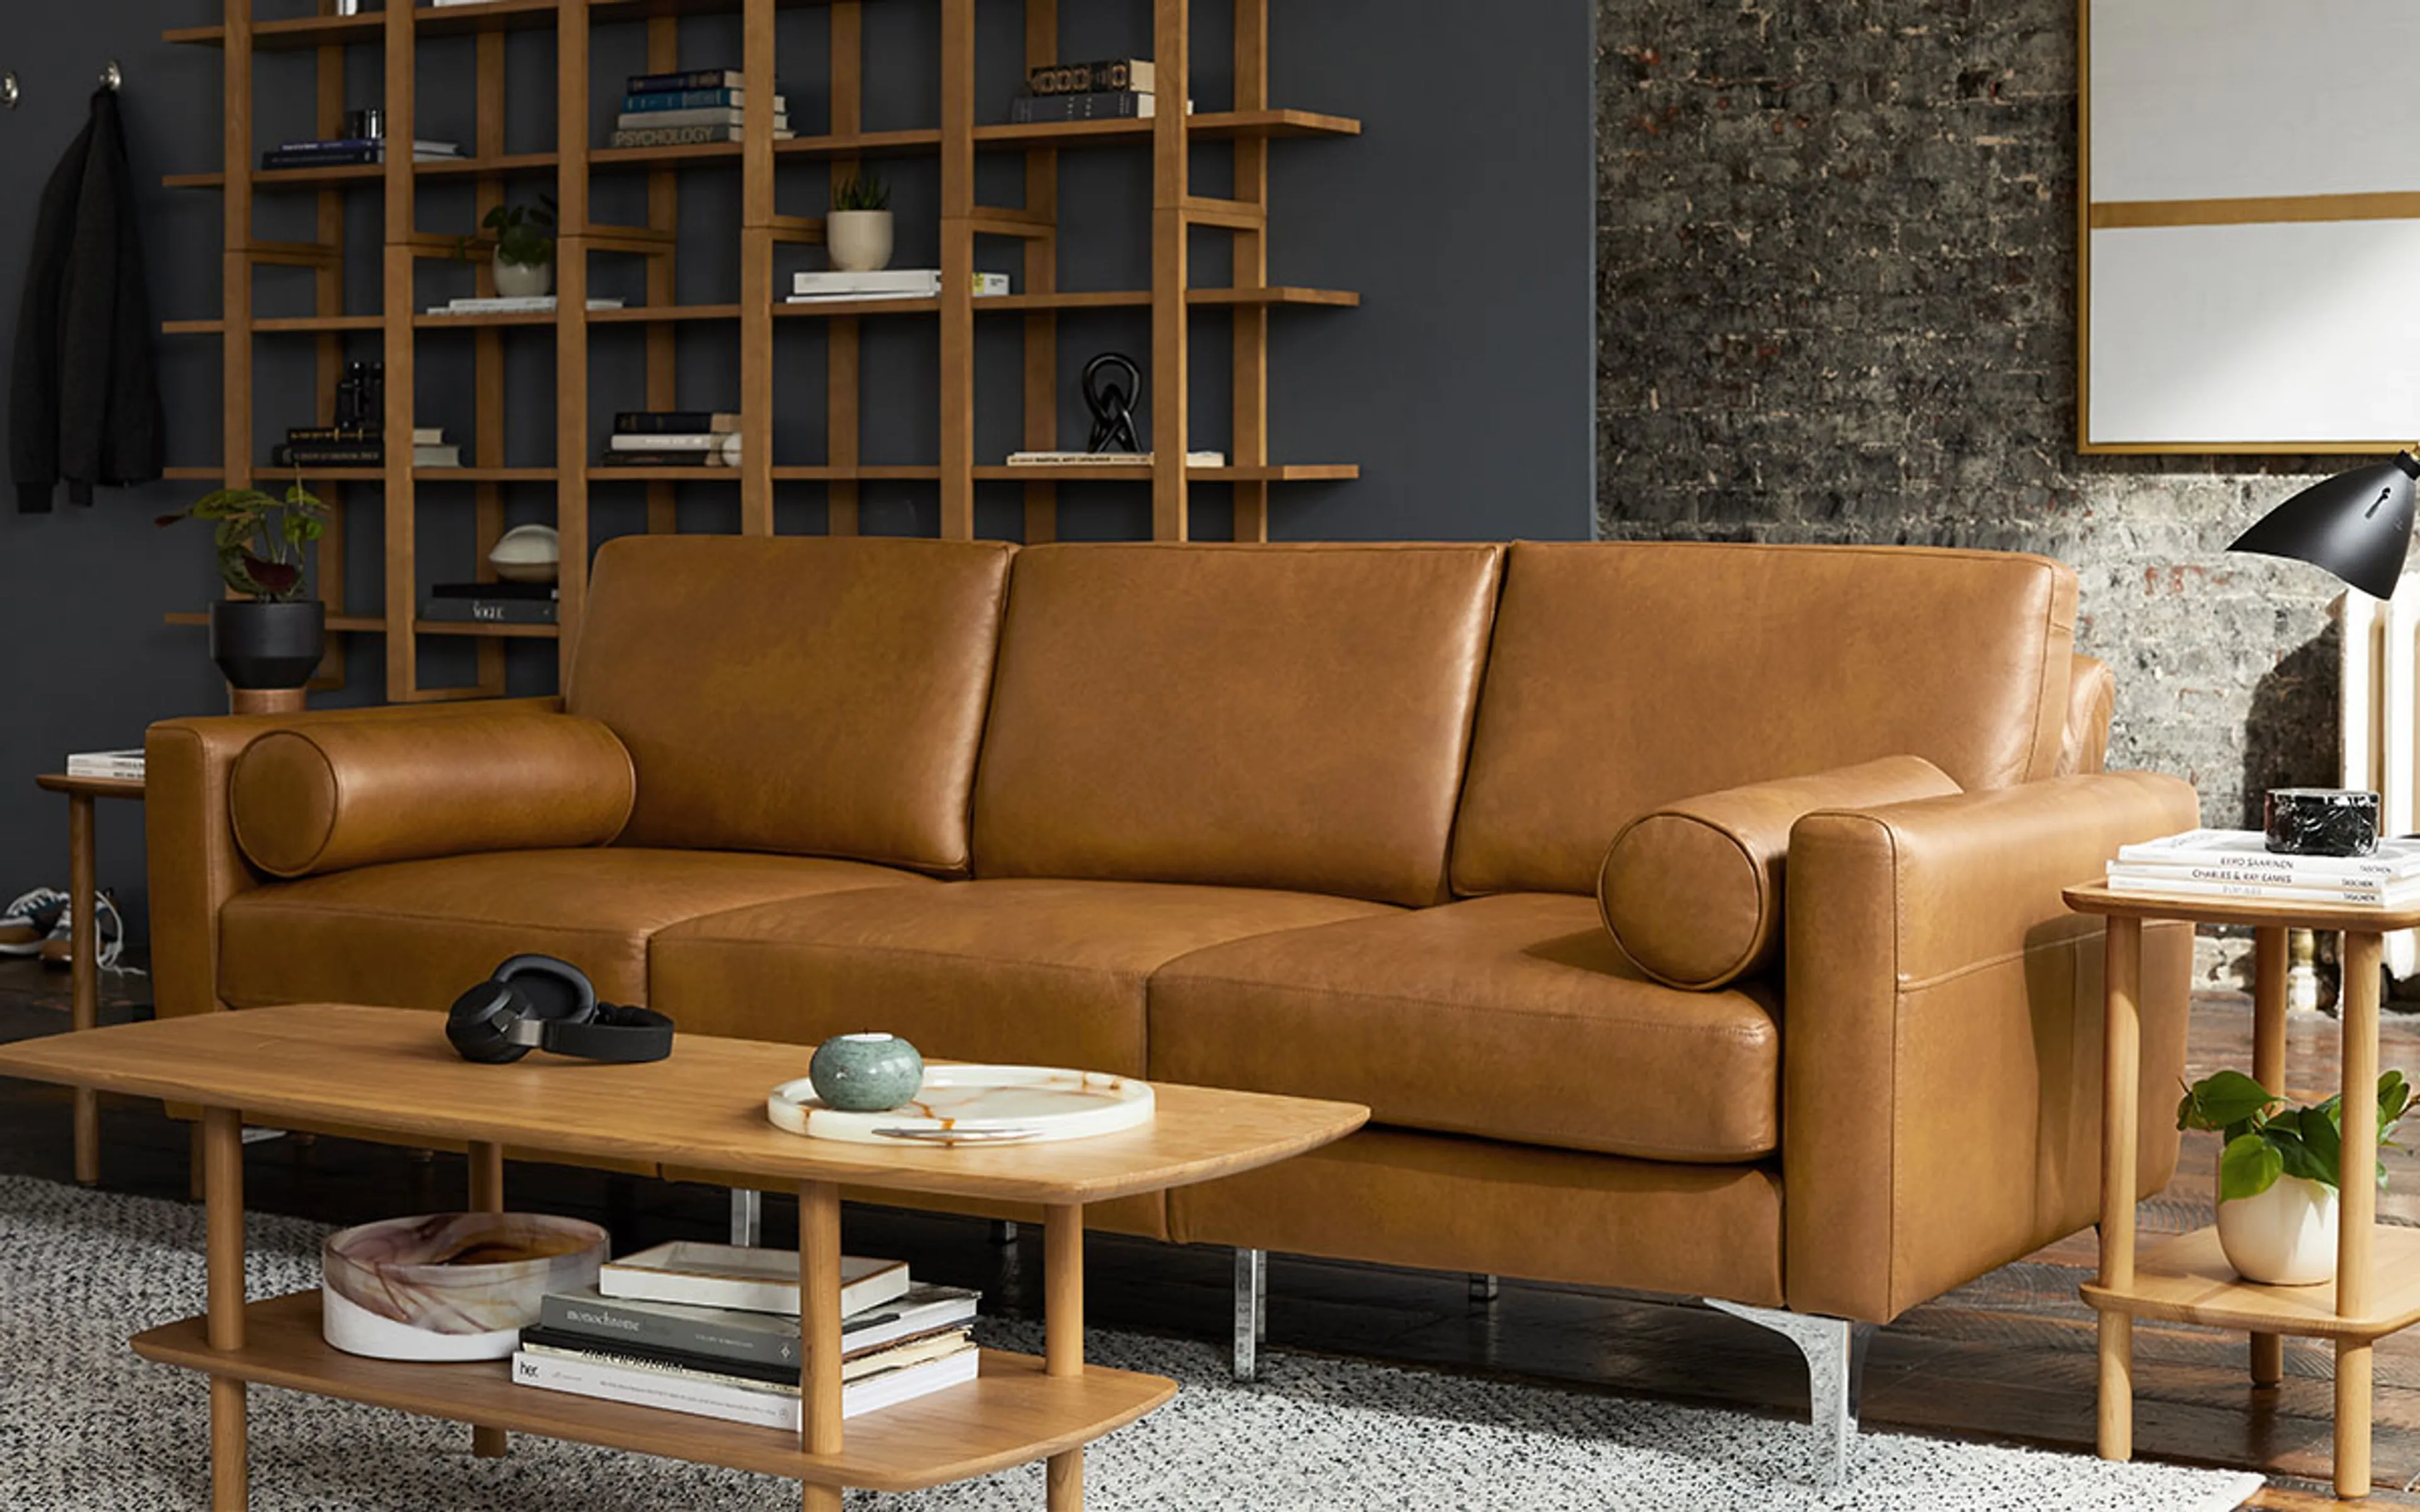 Original Nomad Chaise Loveseat in Camel Leather